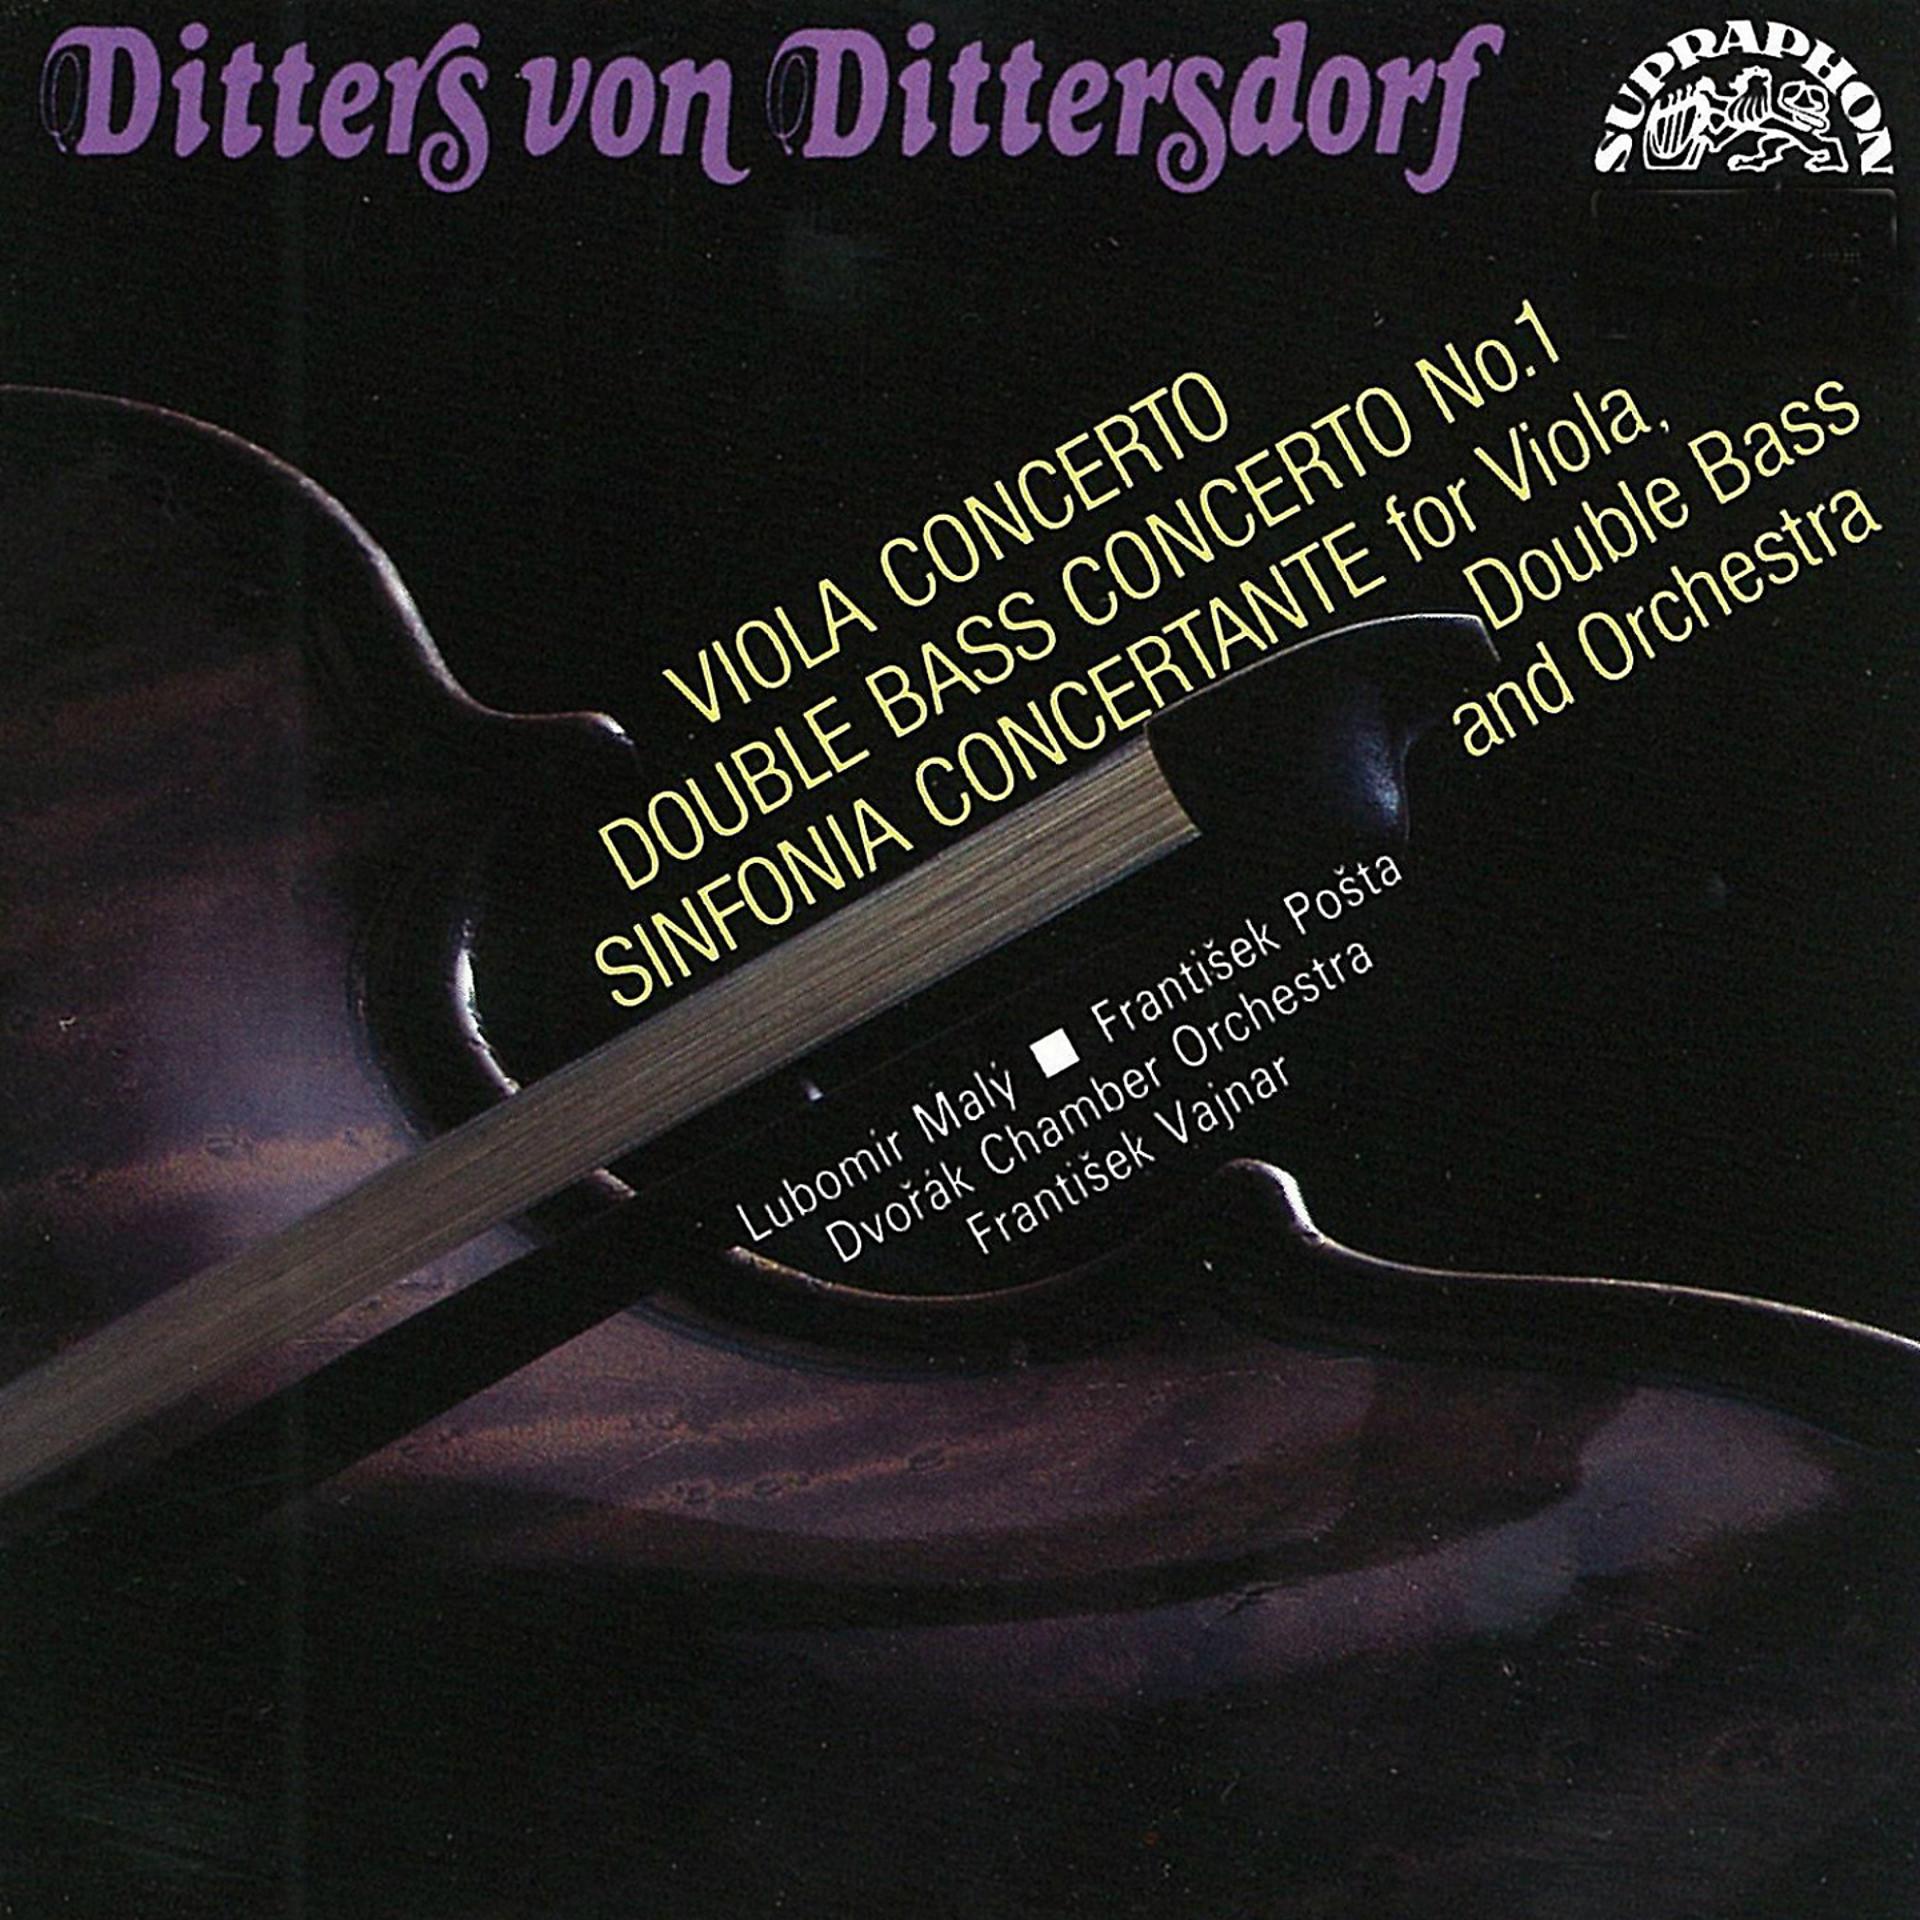 Постер альбома Dittersdorf: Concerto for Double Bass and Orchestra, Concerto for Viola and Orchestra